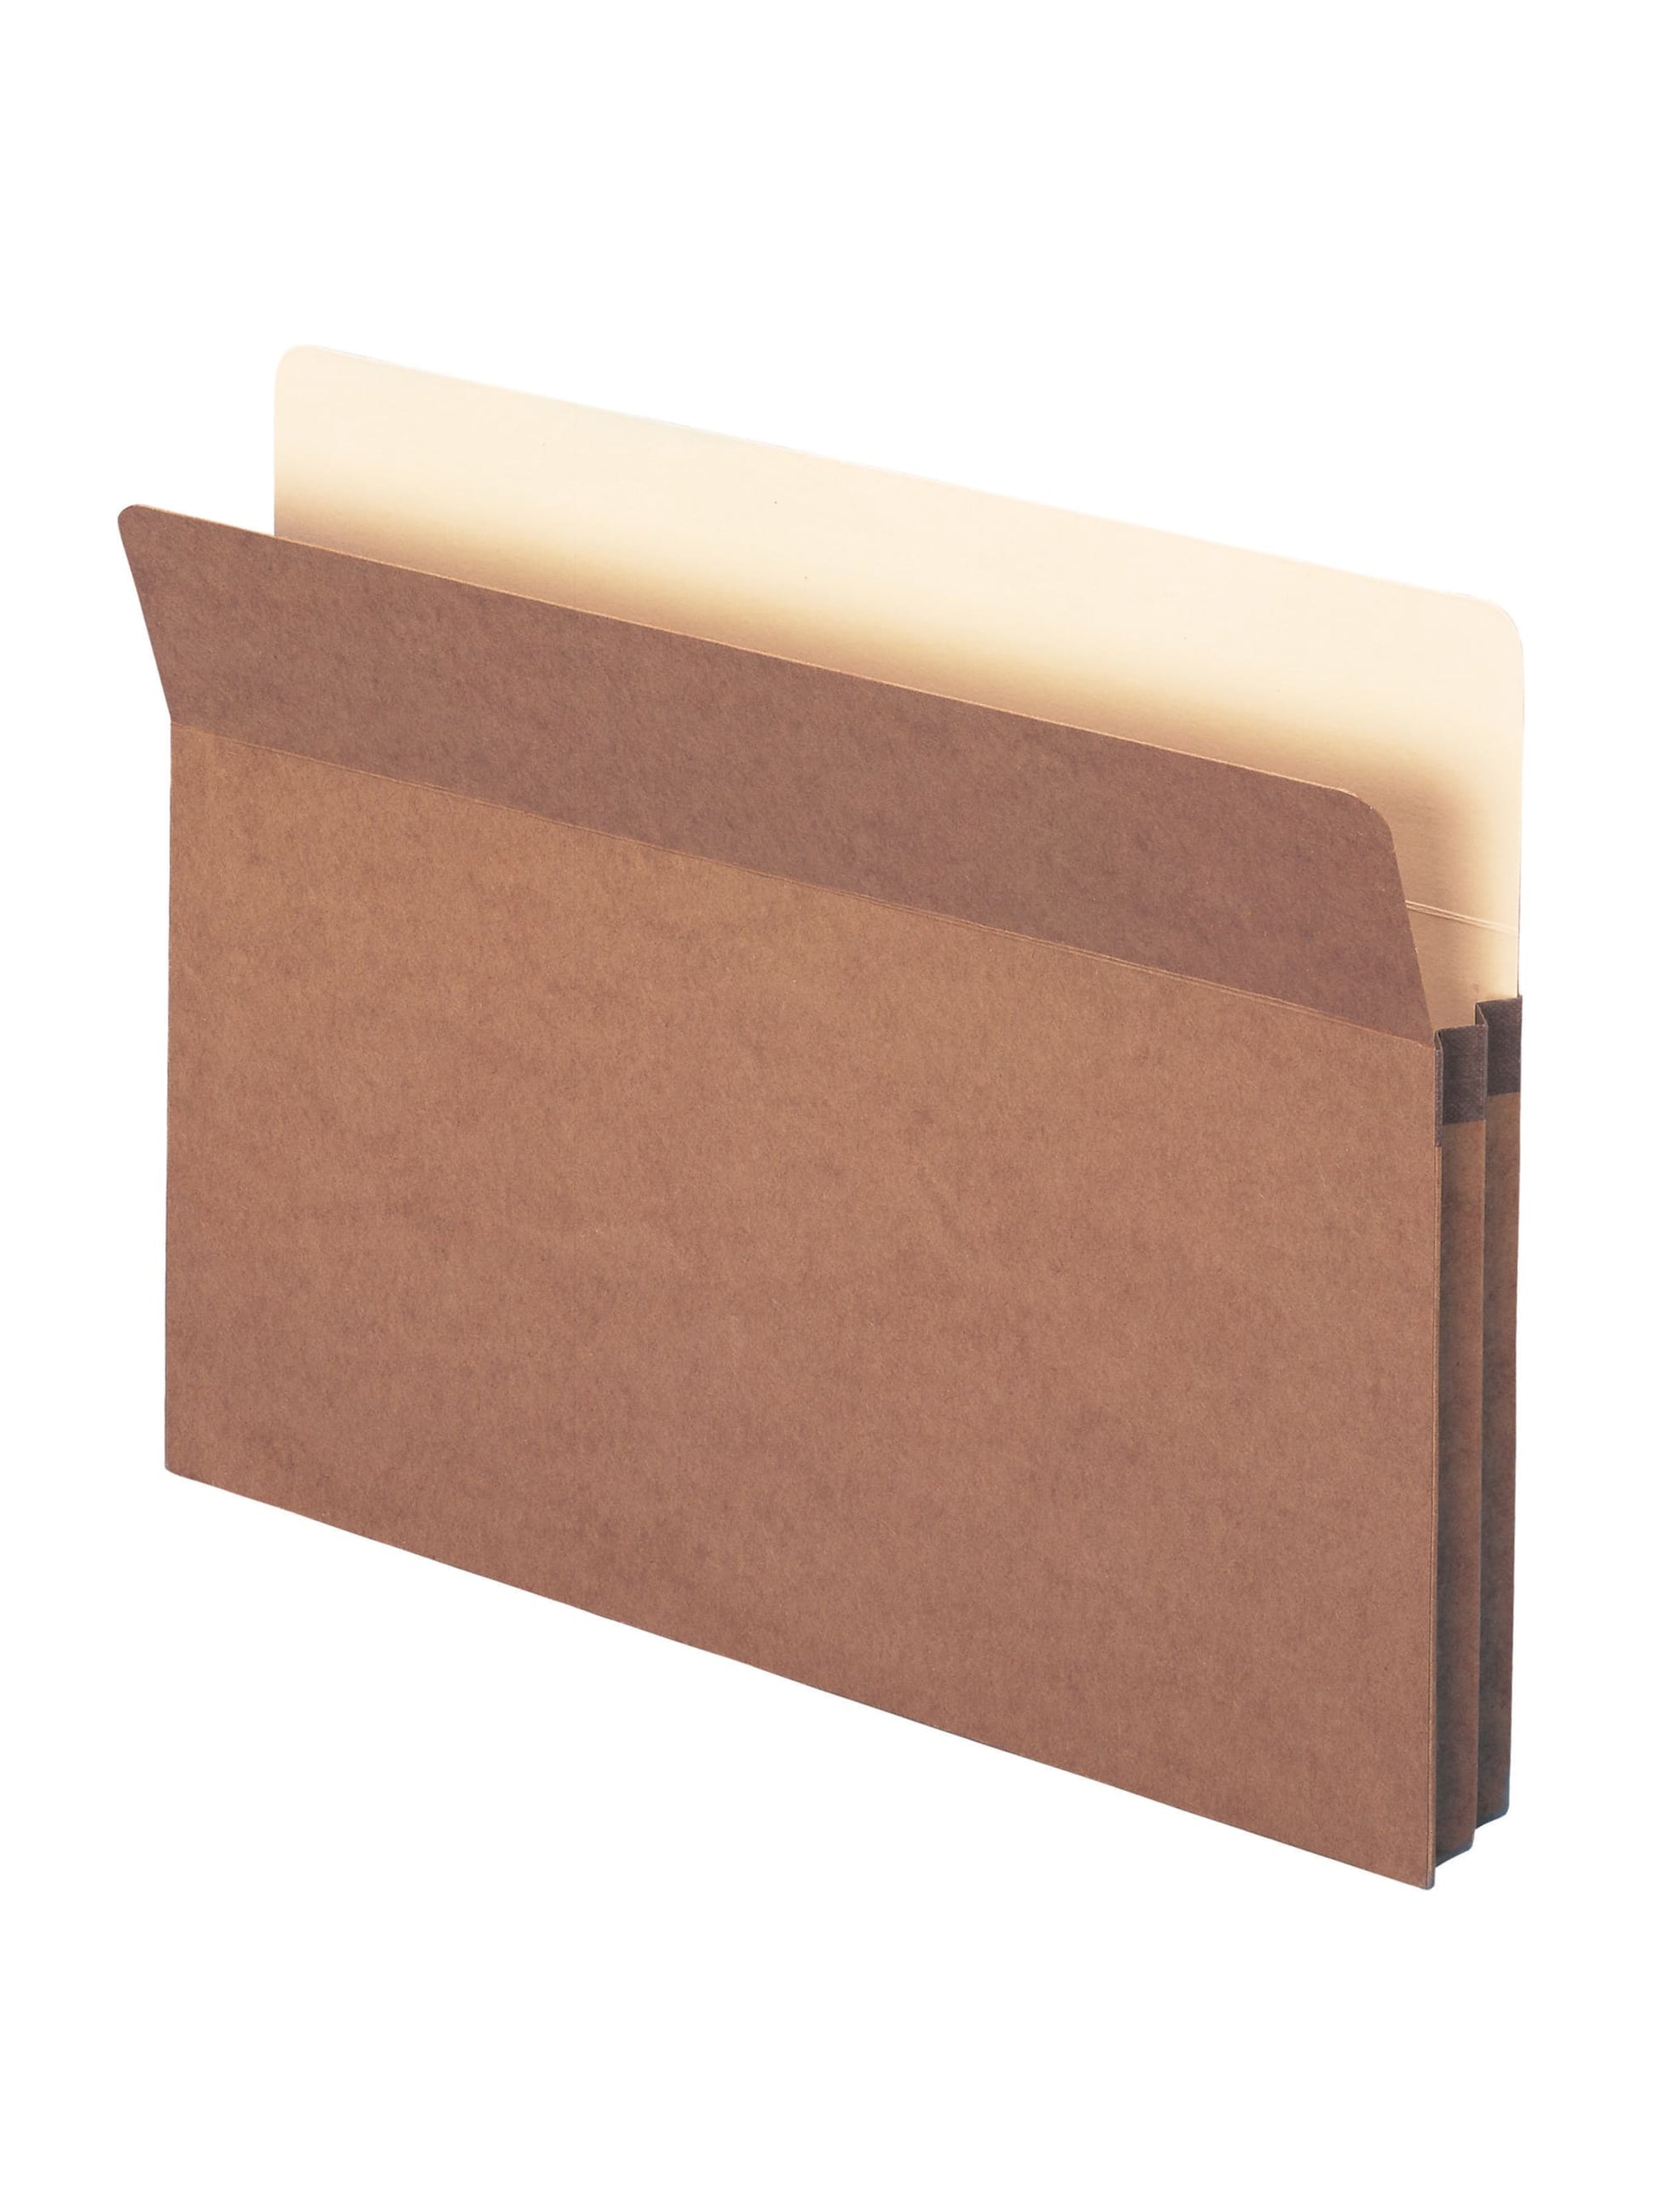 Redrope File Pockets, Straight Cut Tab, 1-3/4 inch Expansion, Redrope Color, Letter Size, Set of 0, 30086486732148